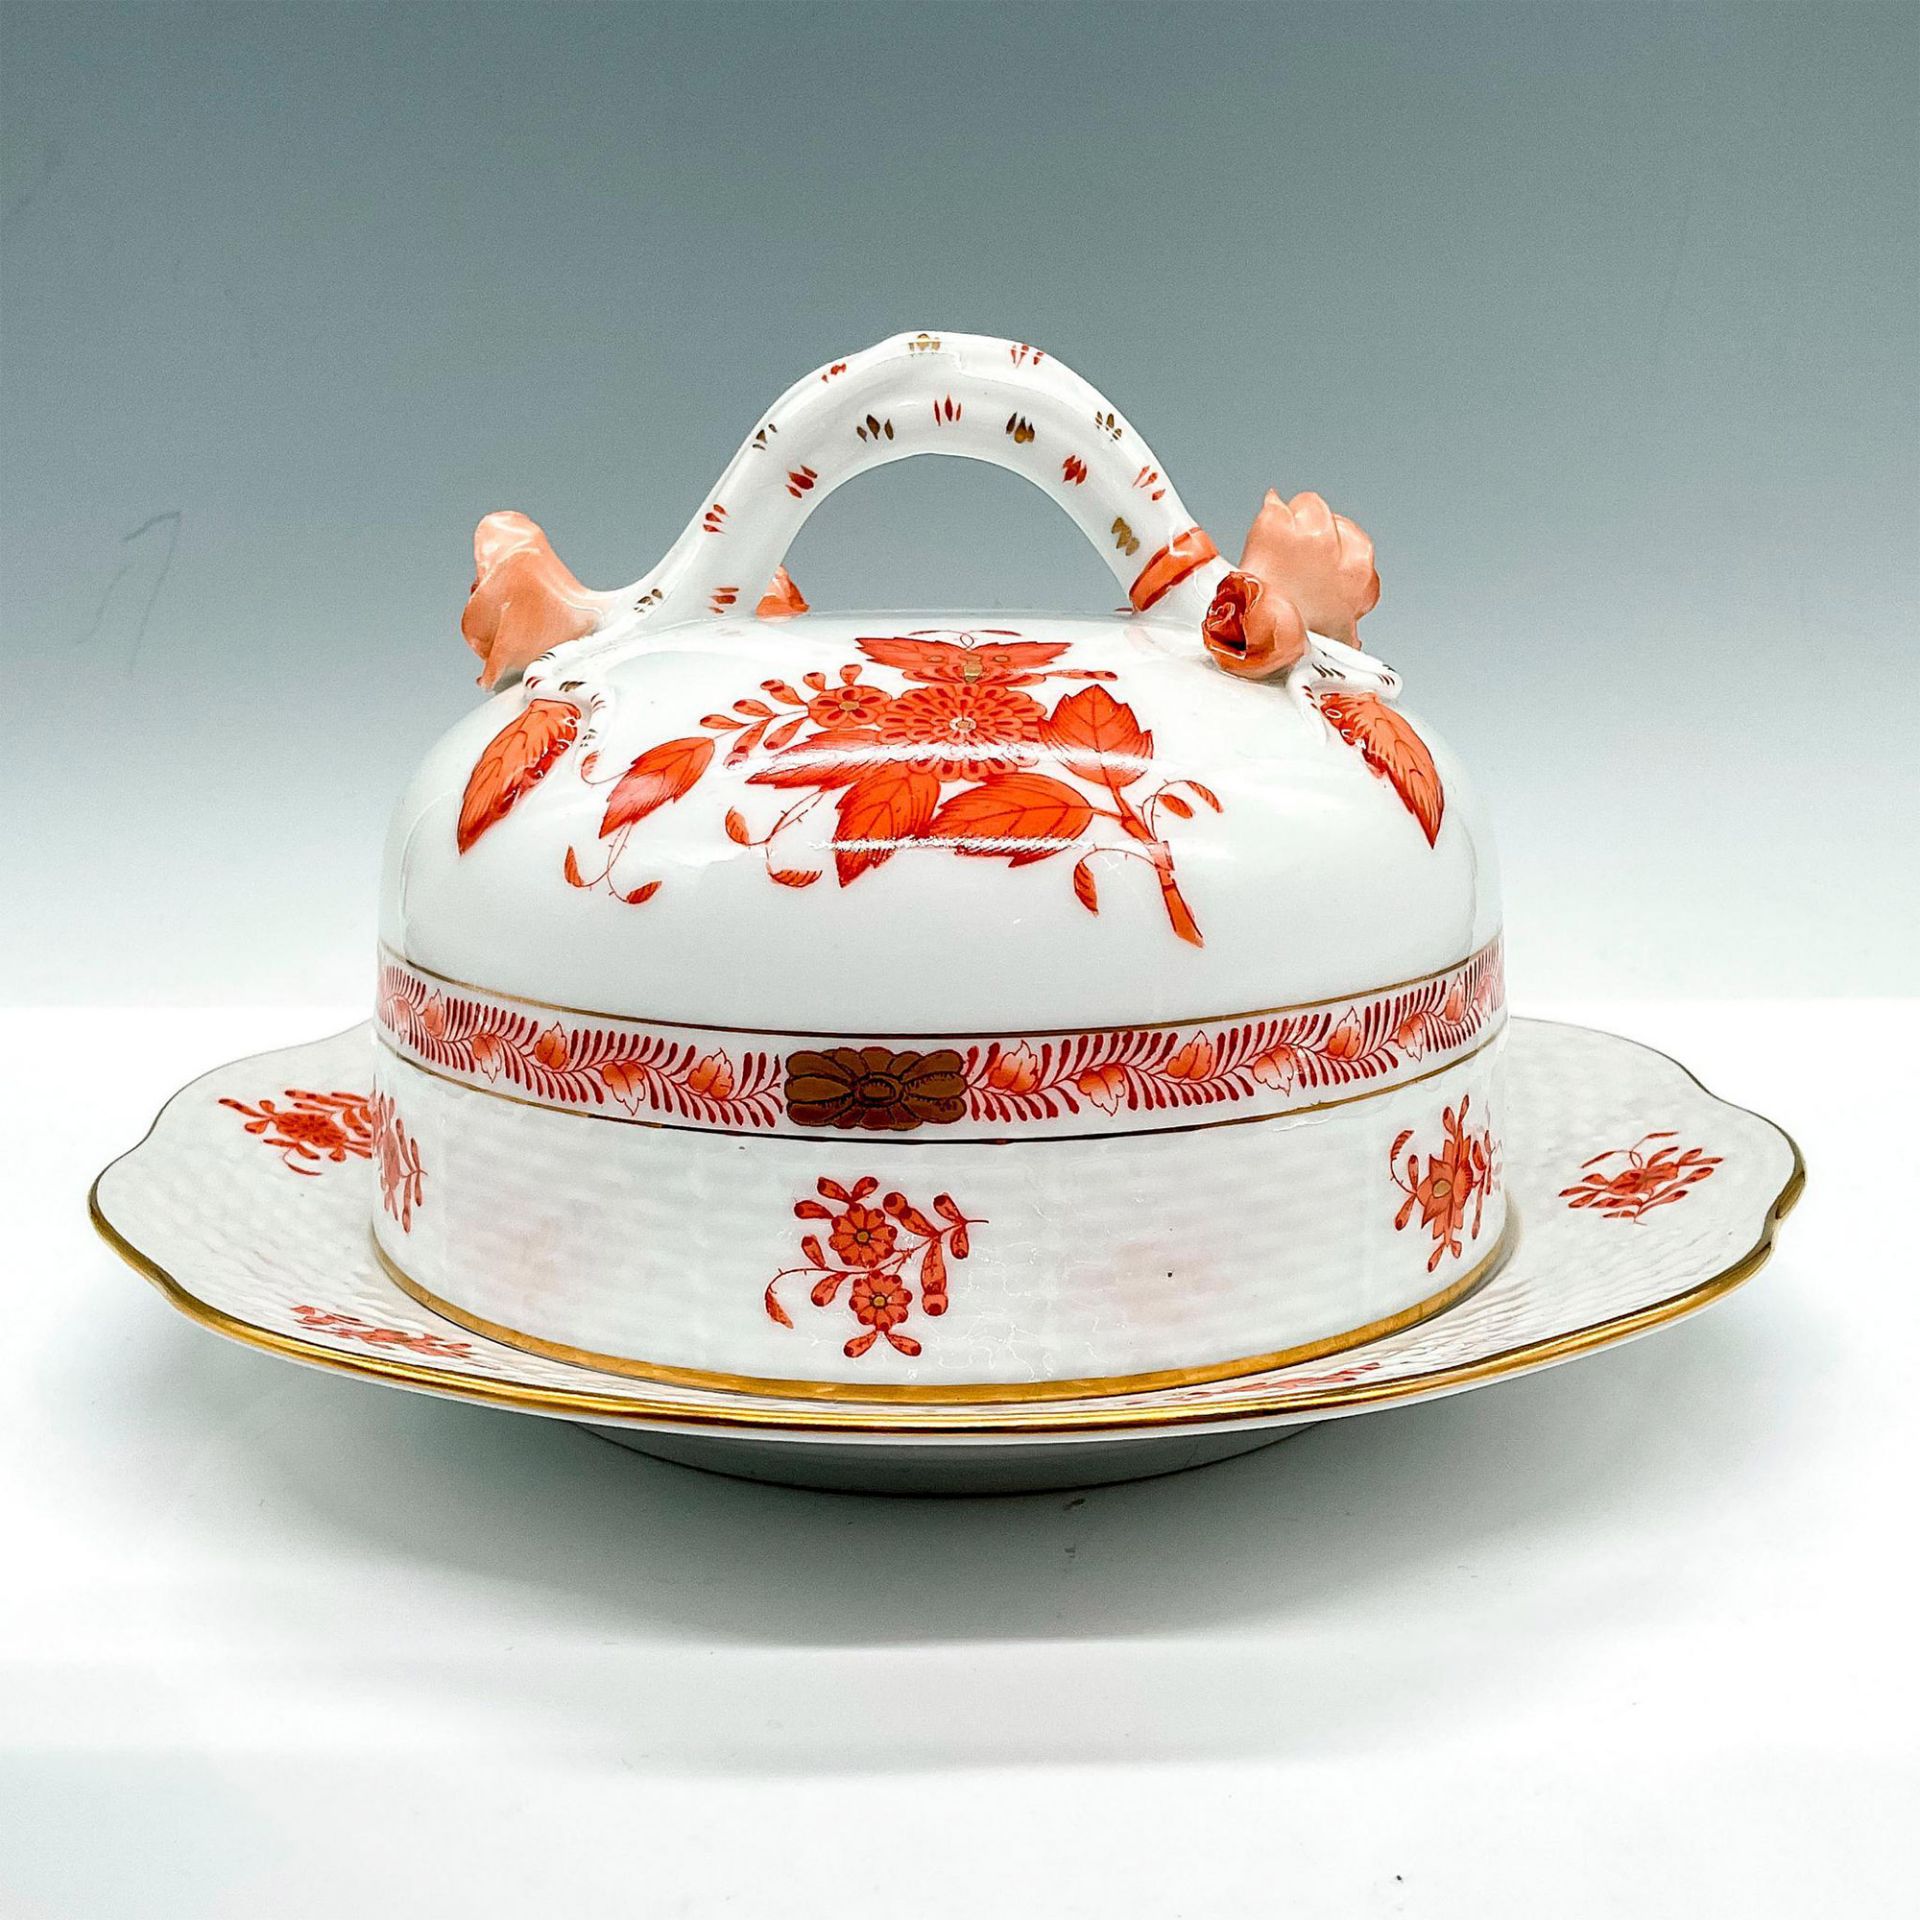 Herend Porcelain Butter Dish, Rust Chinese Bouquet